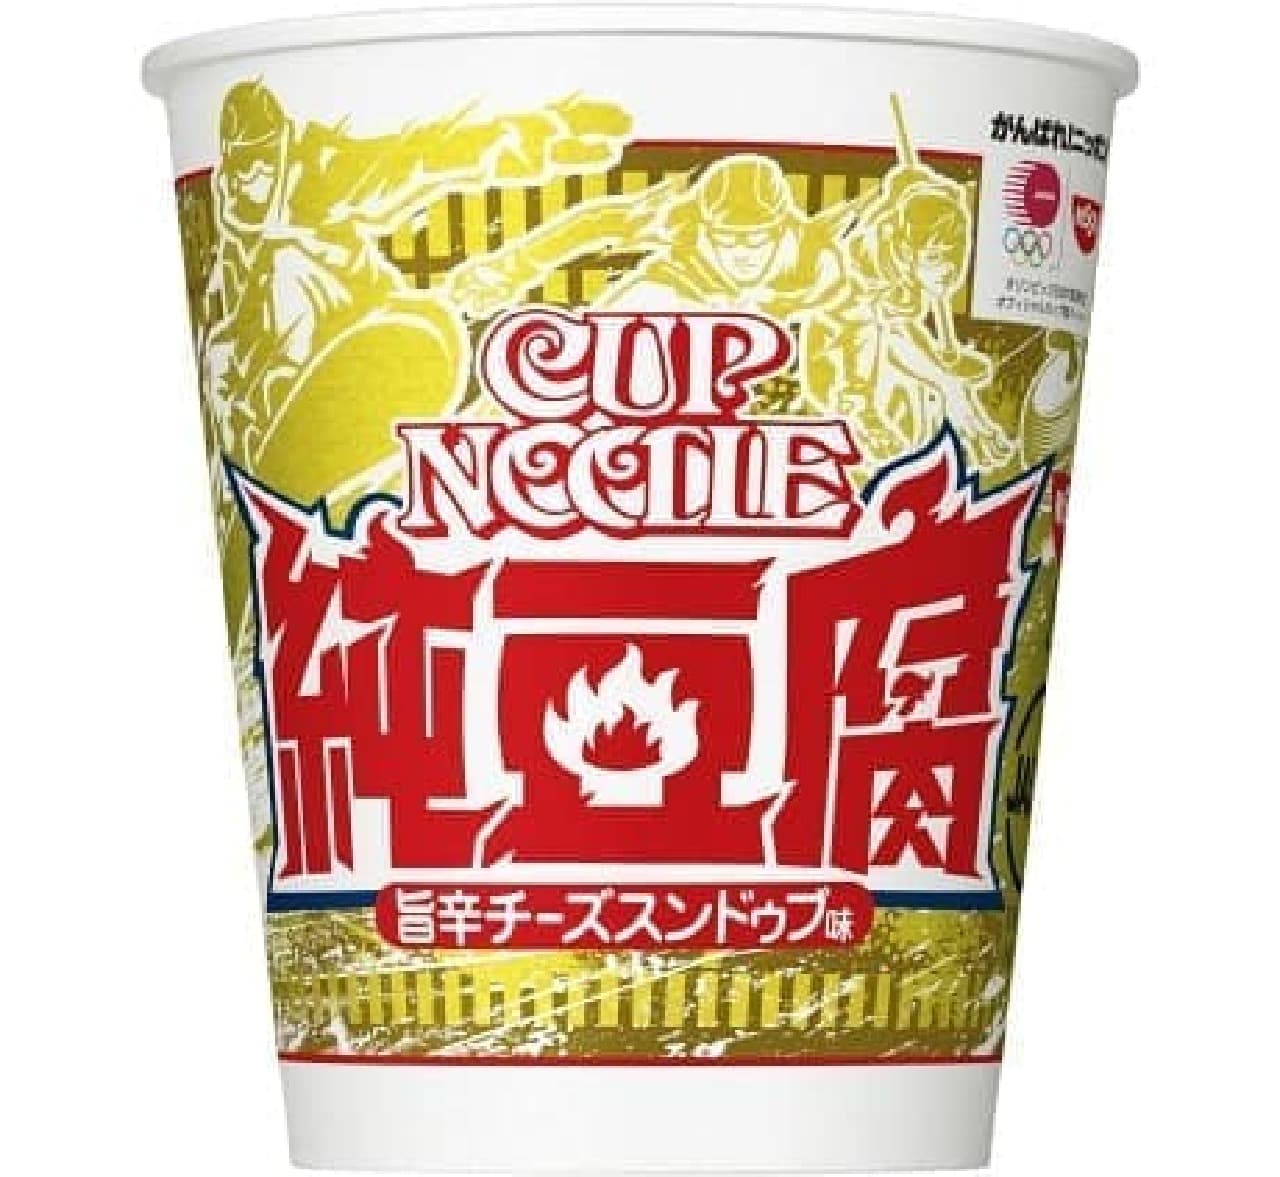 Nissin Foods "Cup Noodle Spicy Cheese Sundubu"